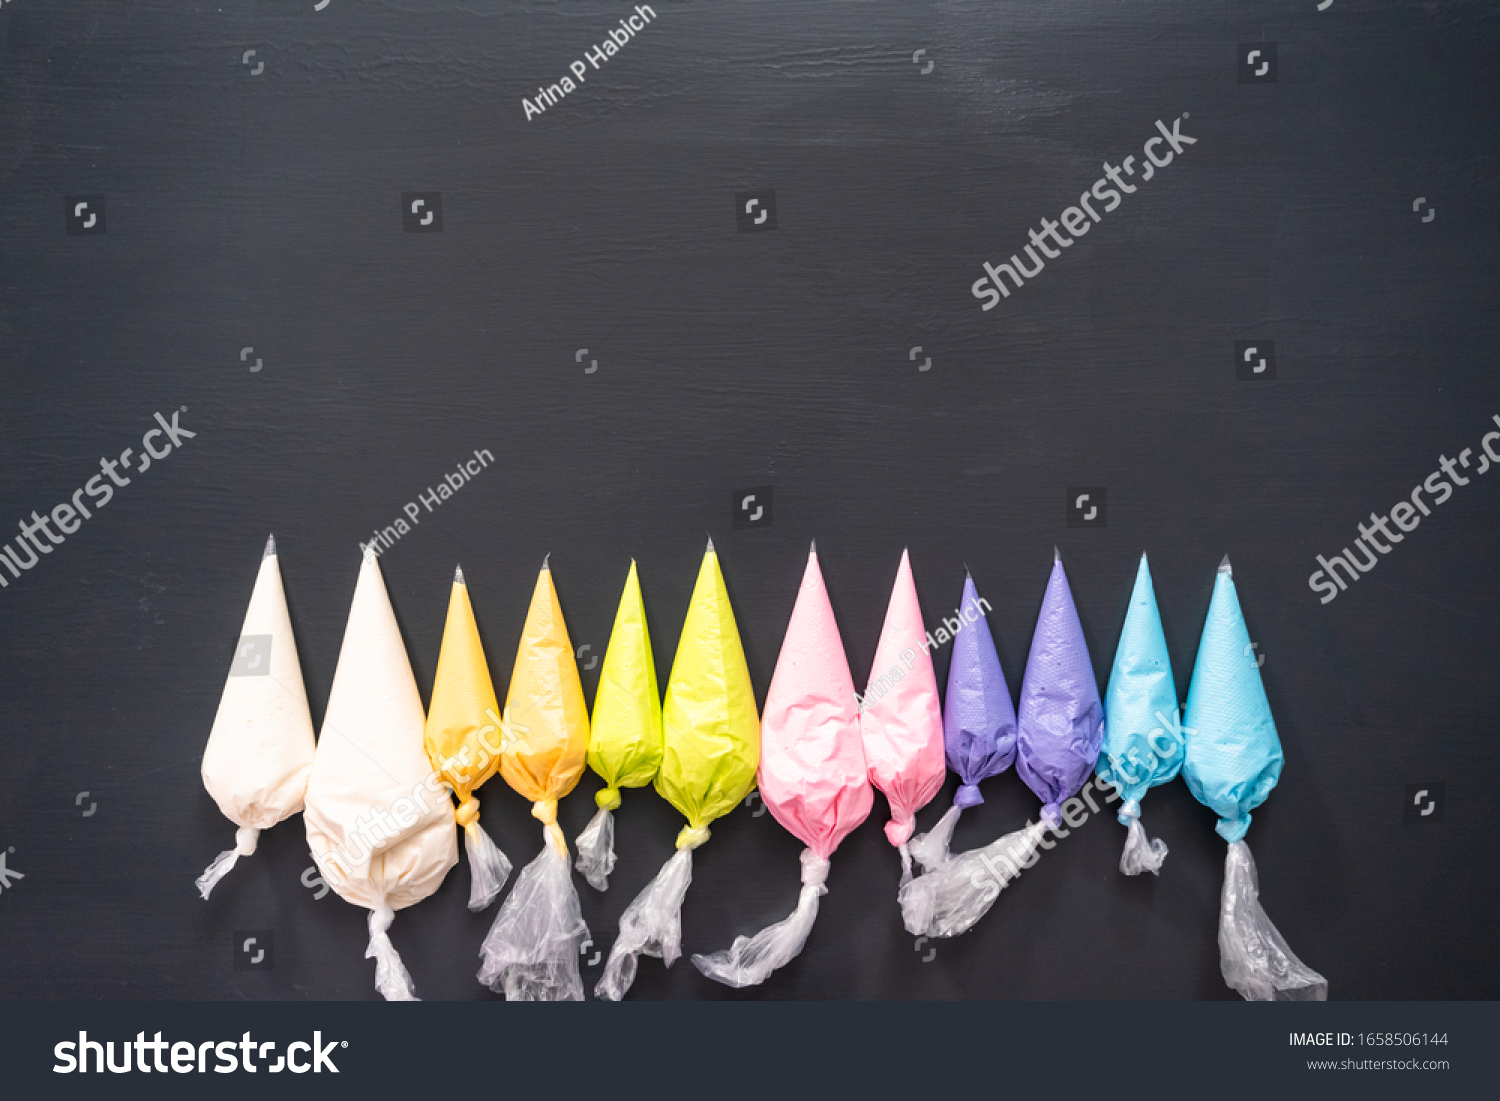 Flat lay. Variety of colors of royal icing in plastic piping bags. #1658506144